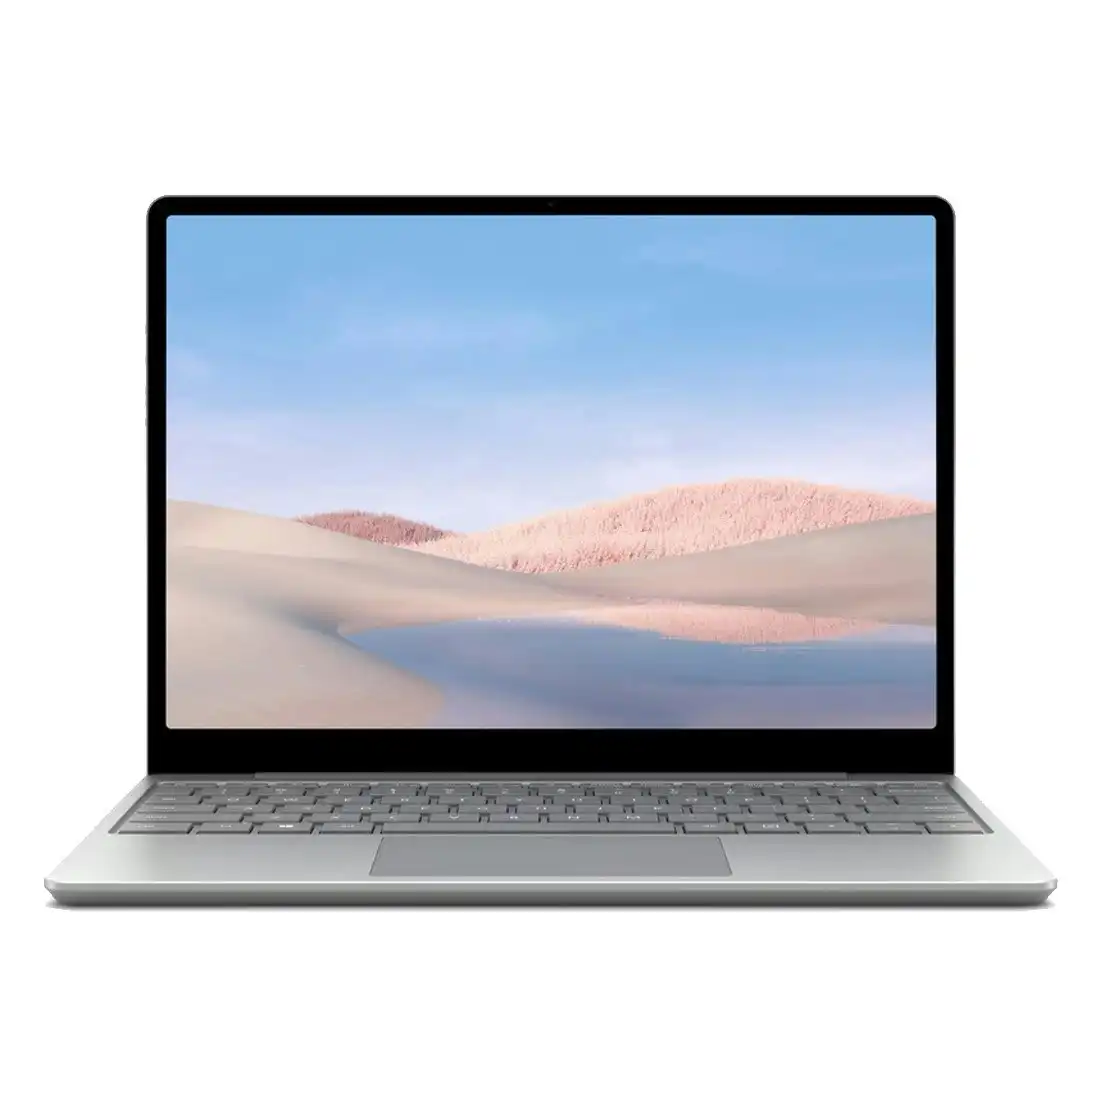 Microsoft Surface Laptop Go (12.4", I5, 64GB/4GB, W10P, 1ZP-00023) [Refurbished] - Excellent